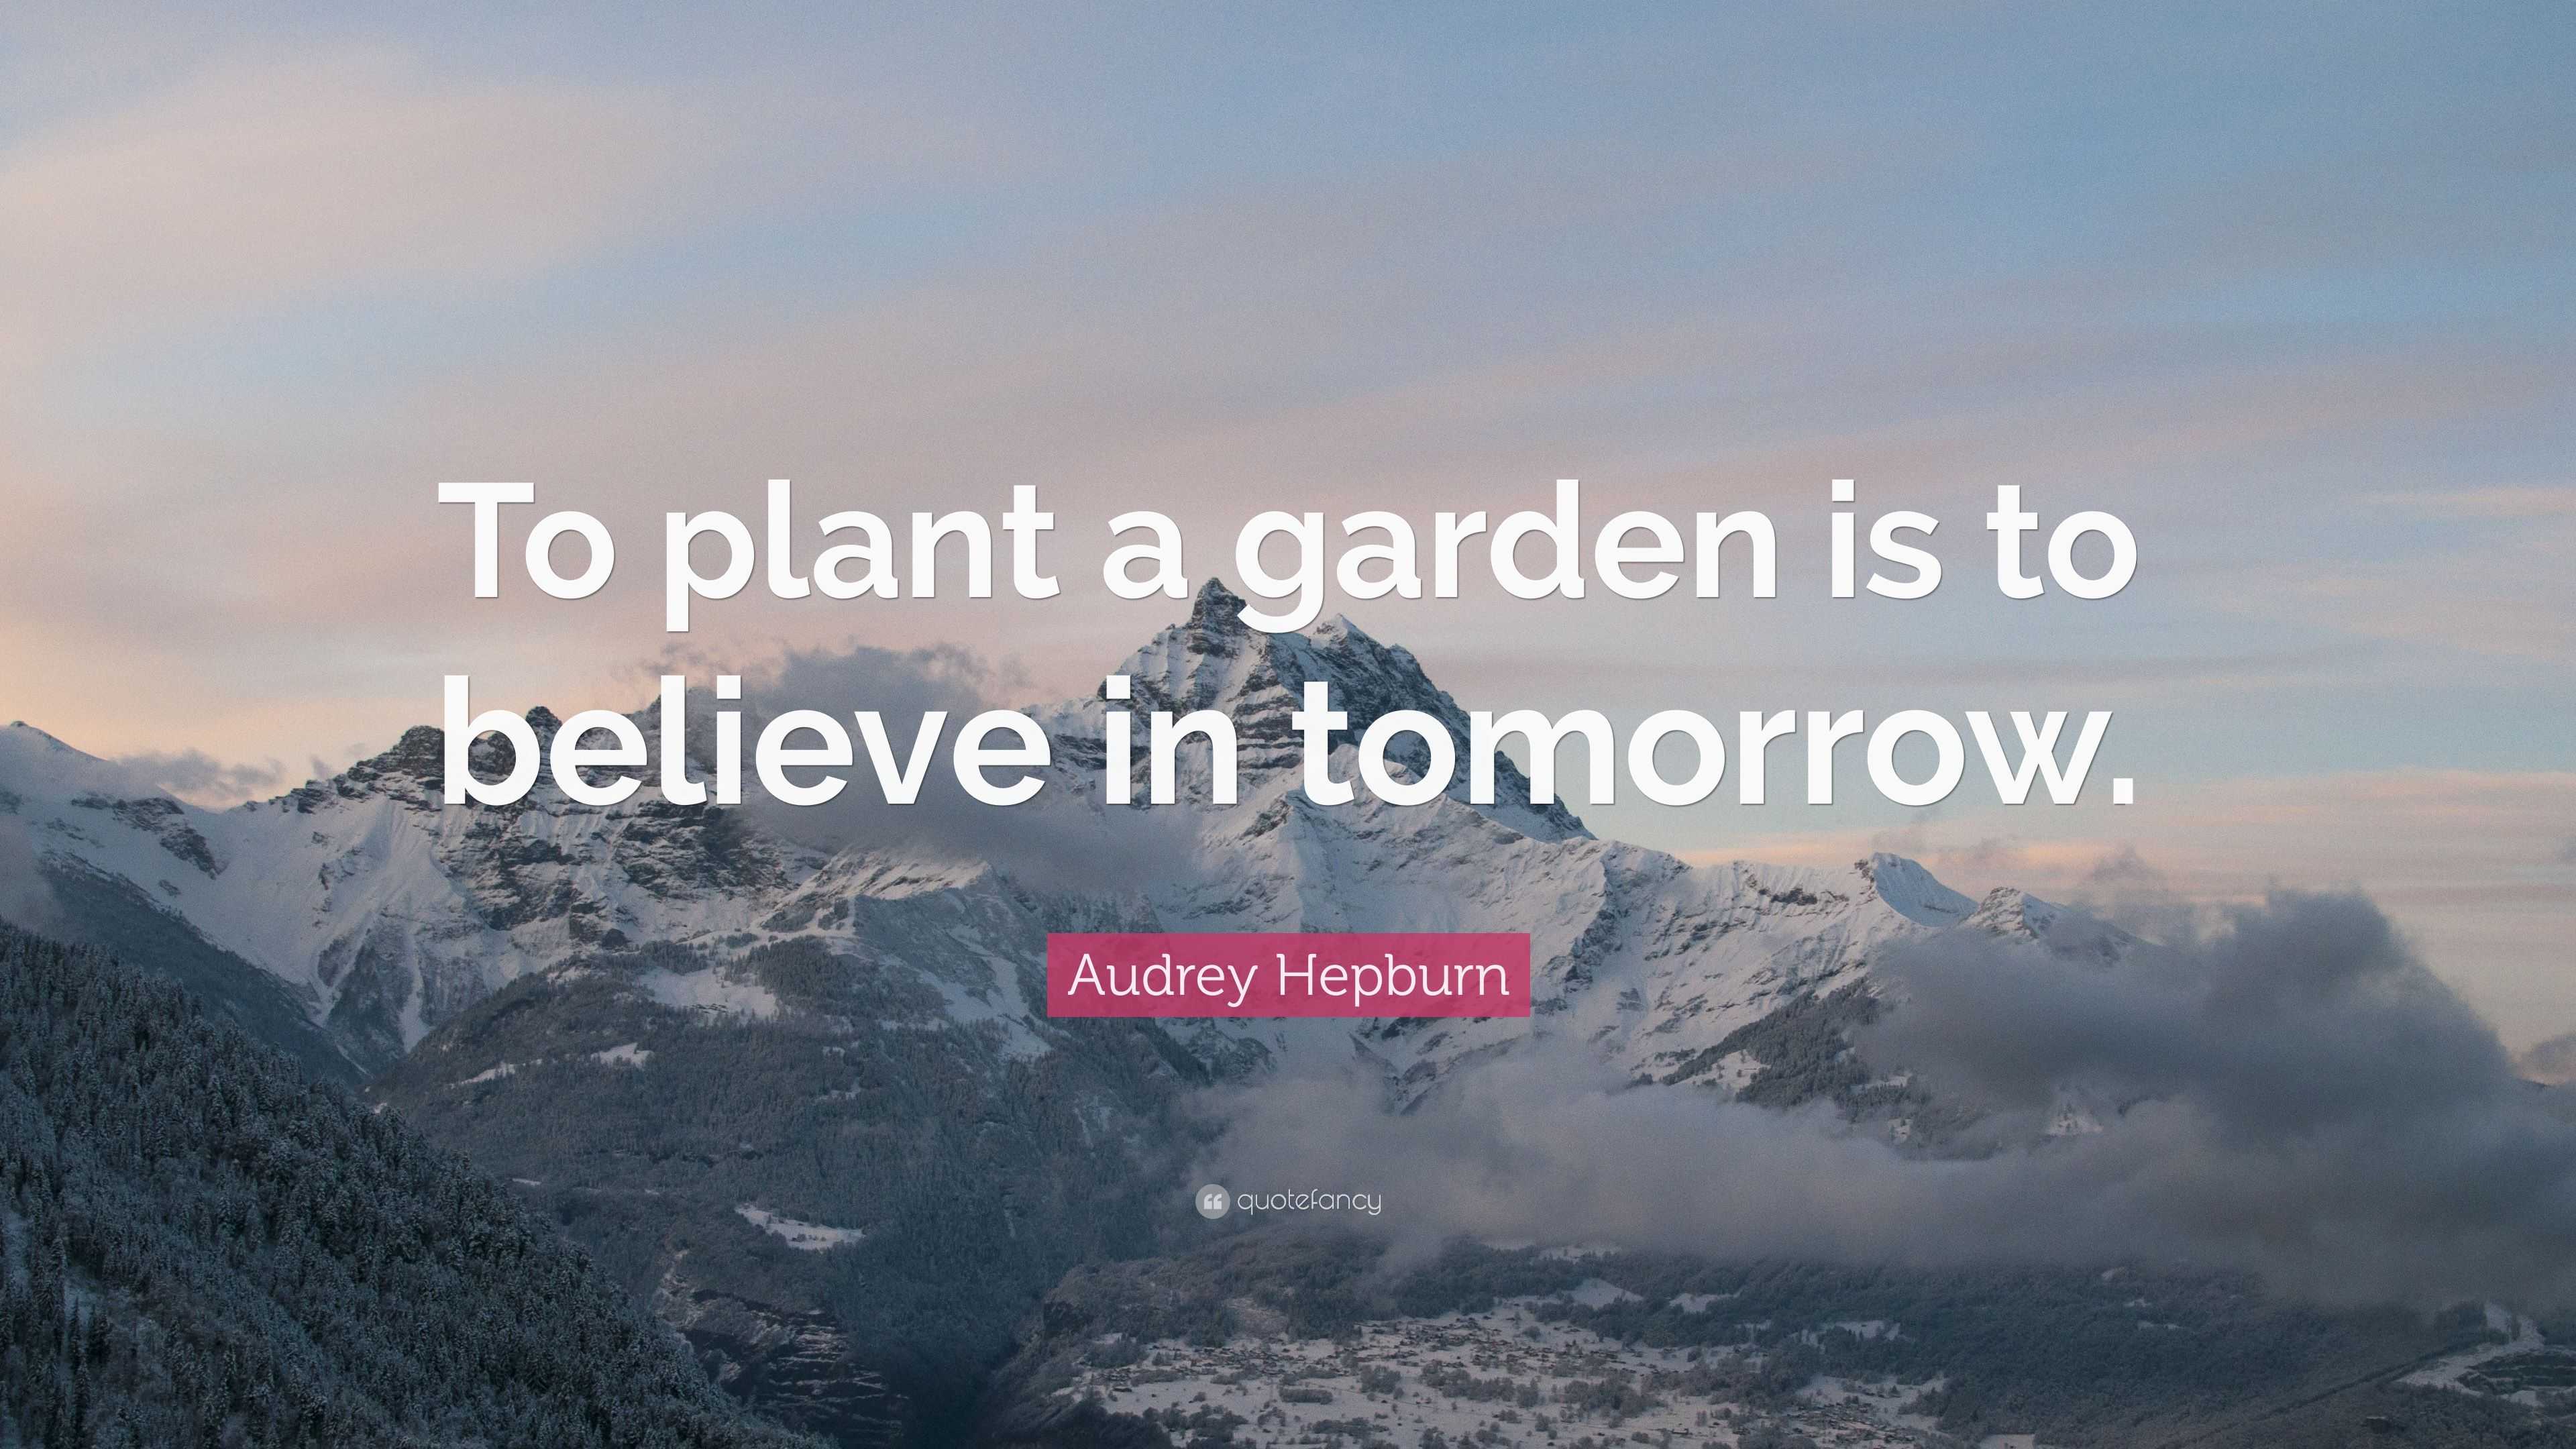 Audrey Hepburn Quote: “To plant a garden is to believe in tomorrow.”